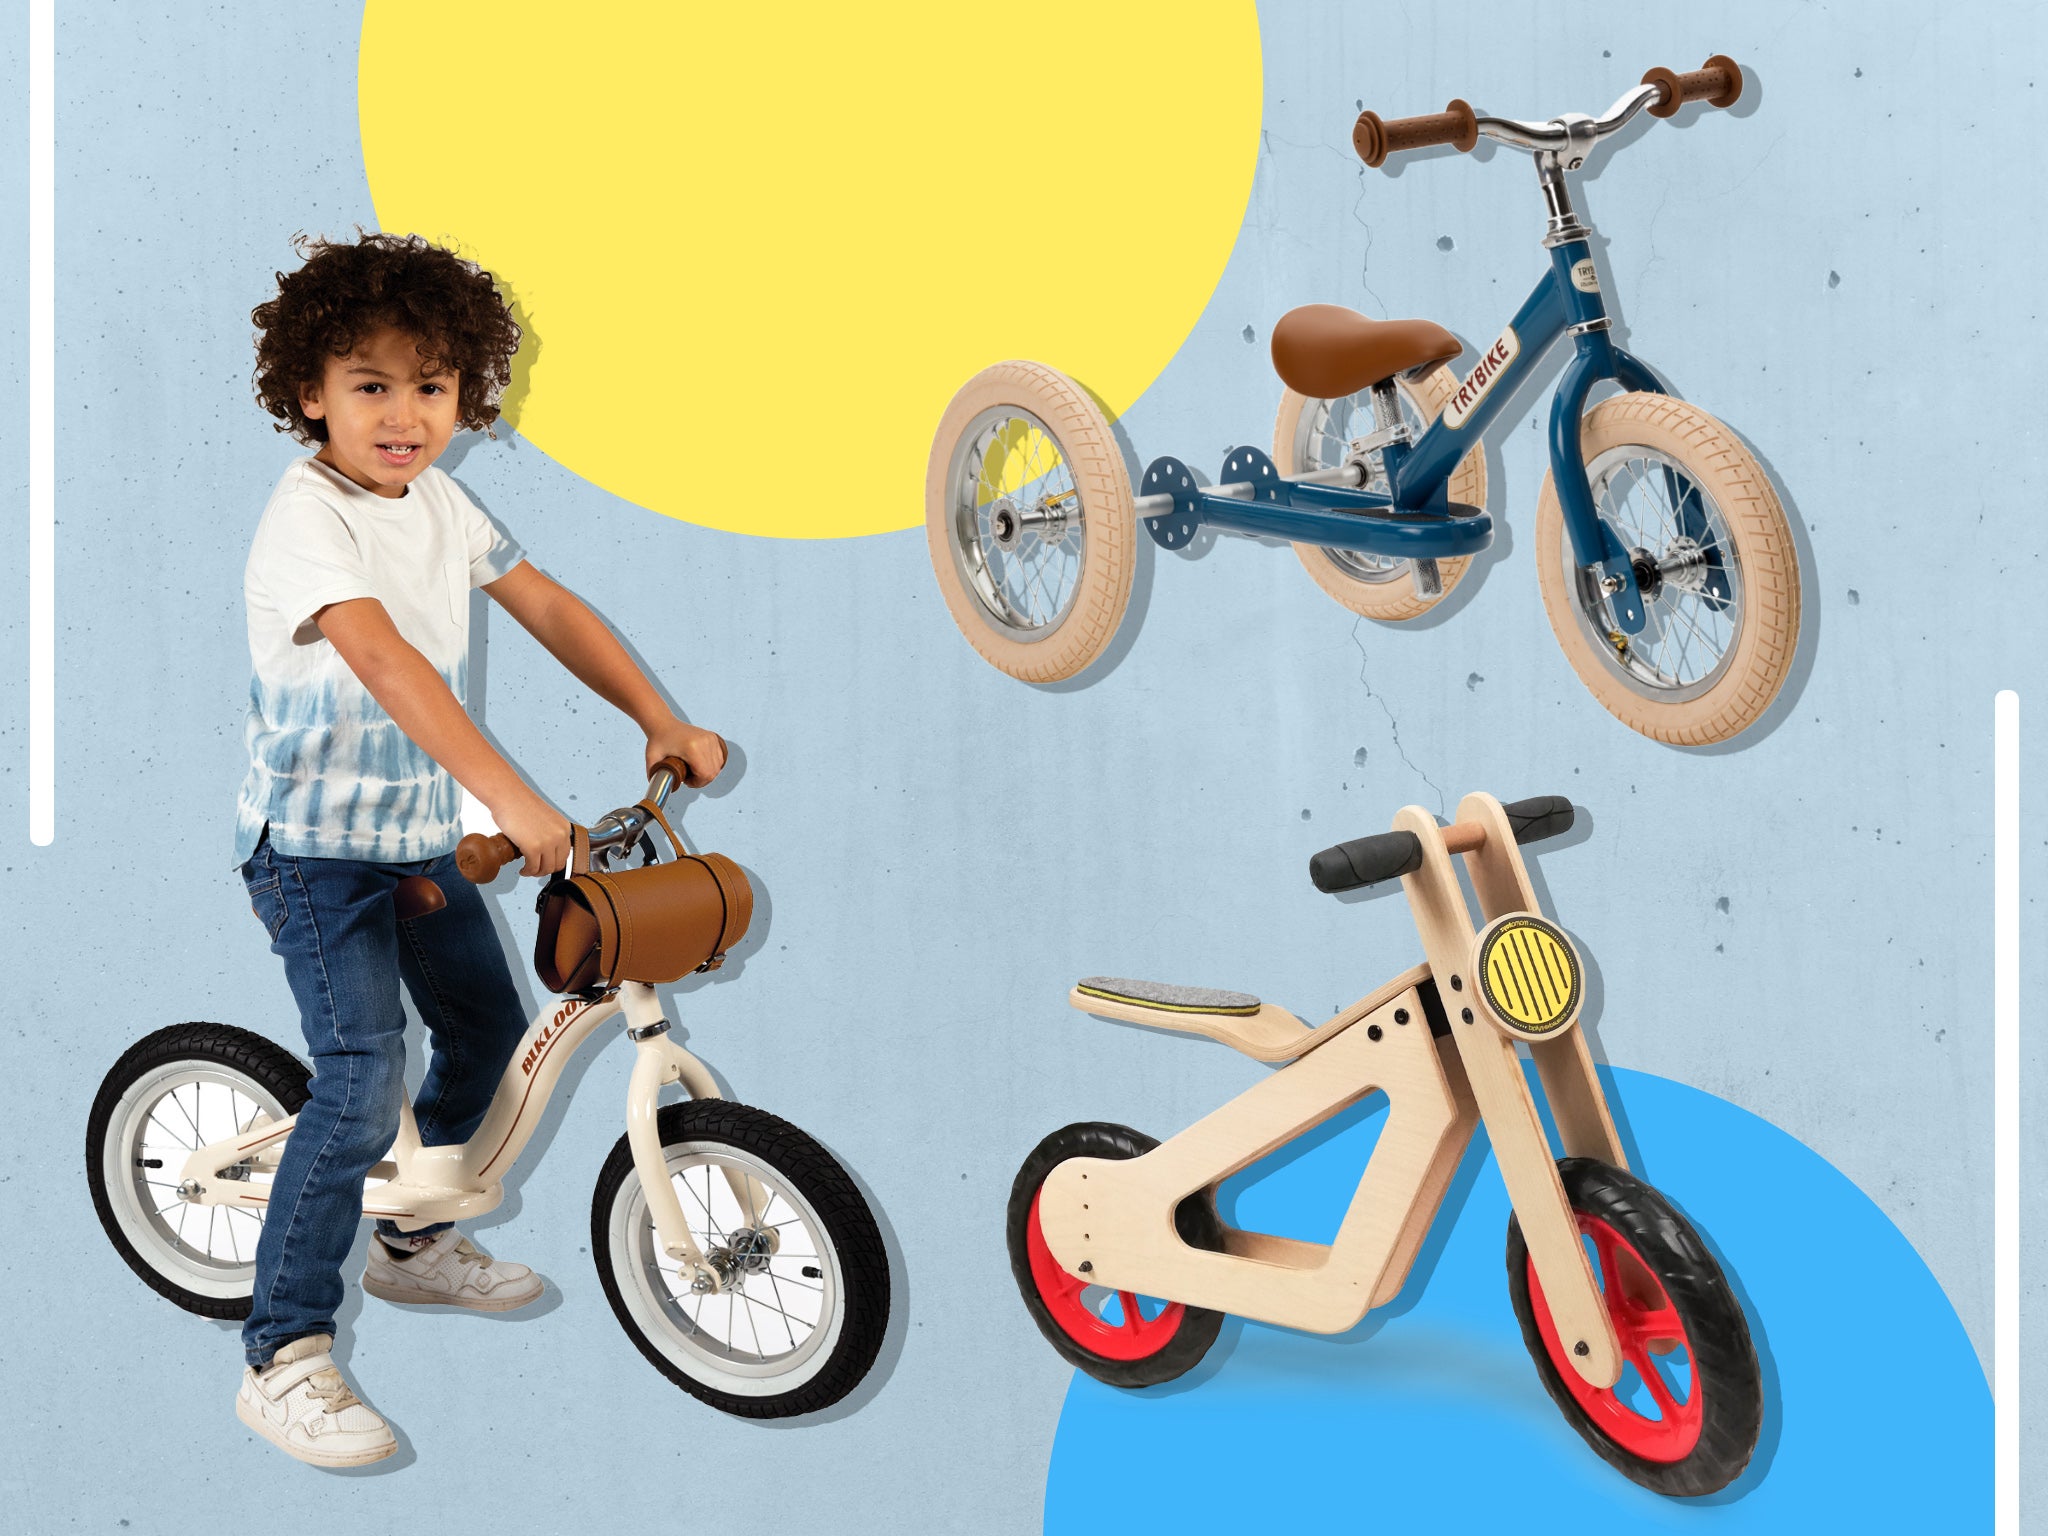 No Pedal Toddler Scooter Bike with Carbon Steel Strider Walking Bicycle for 20 Months to 5 Years Old Adjustable Seat and Handlebar Joolihome 12 Kids Balance Bike with Footrest 